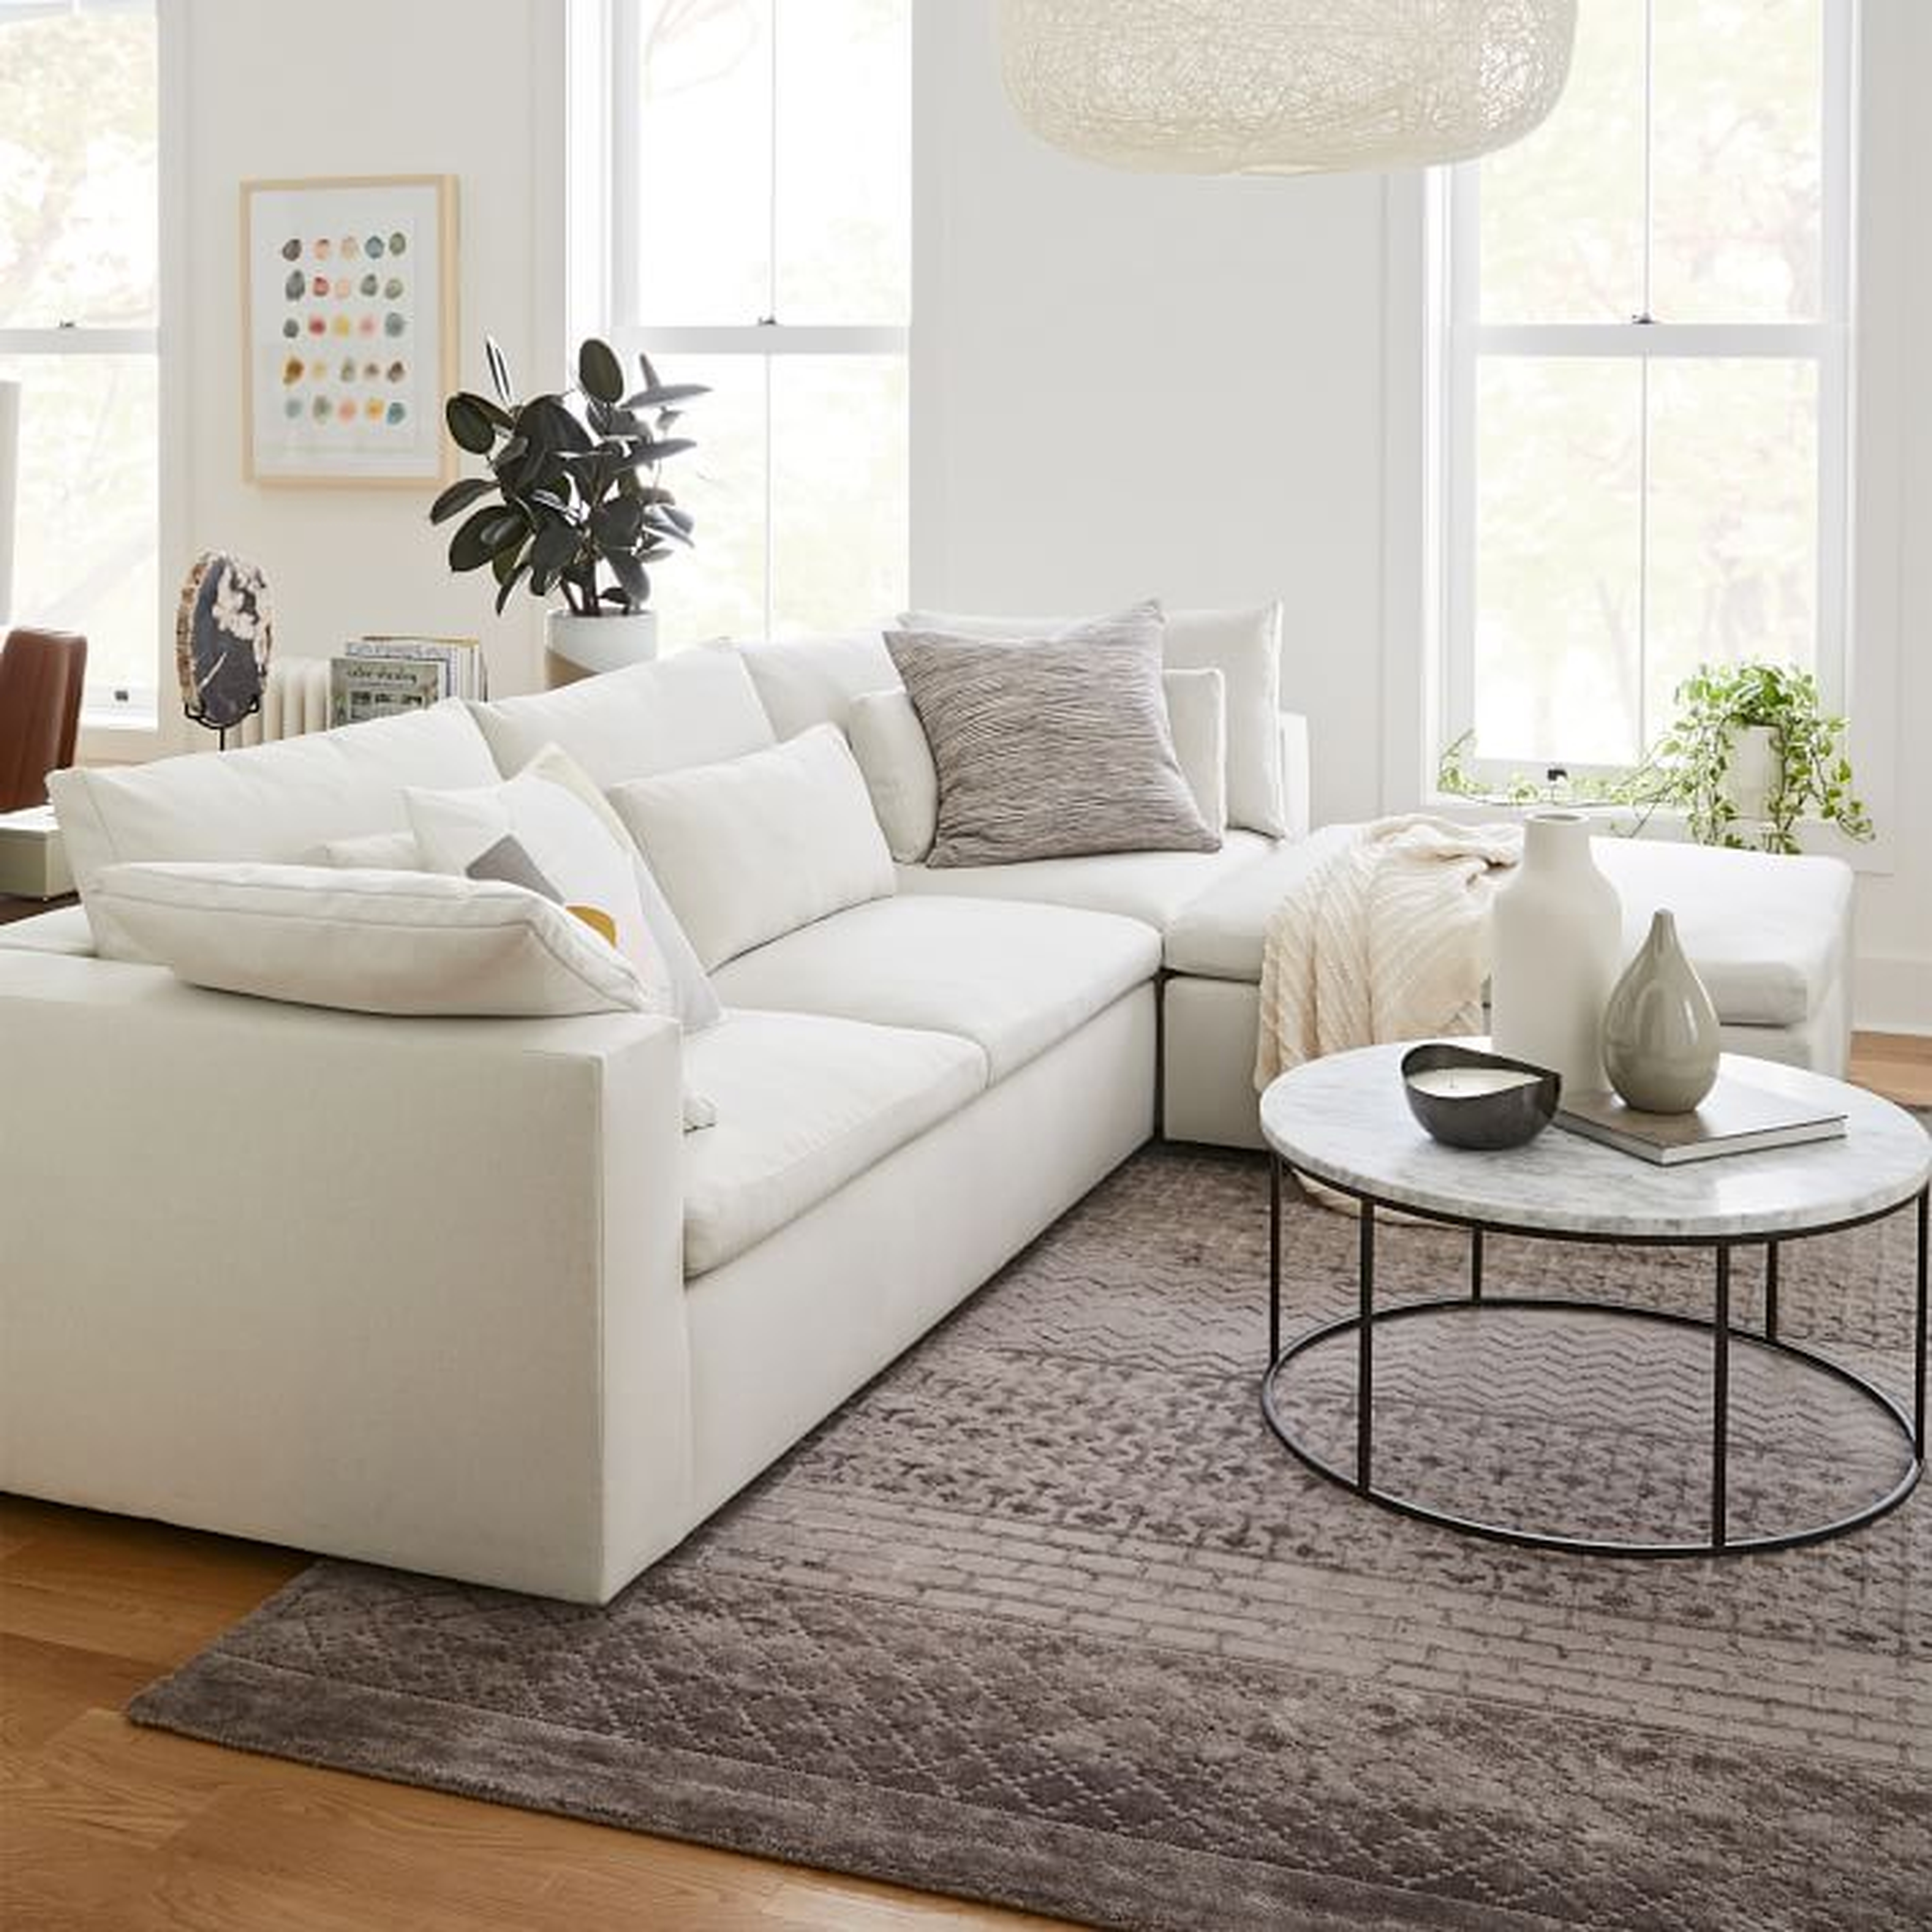 Harmony Modular 3-Piece Chaise Sectional, Performance Stone White - West Elm